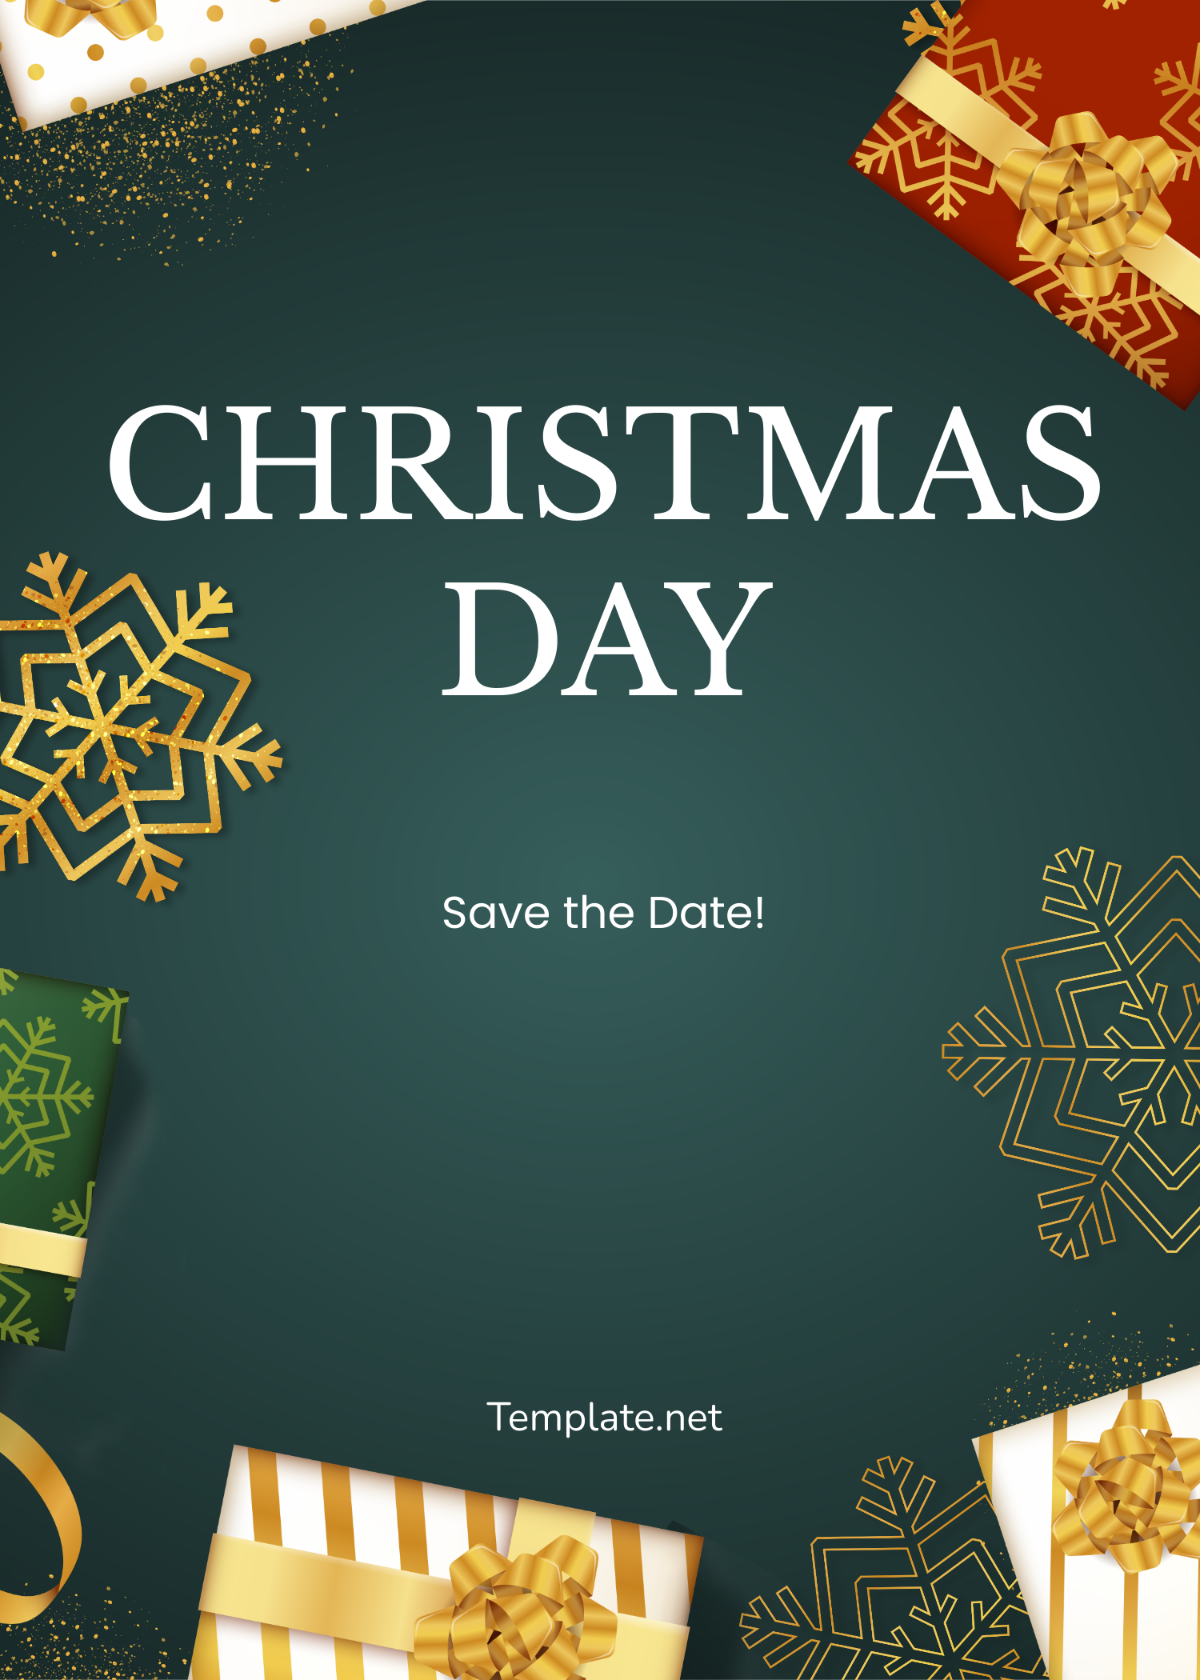 Save the Date Christmas Invitation Template